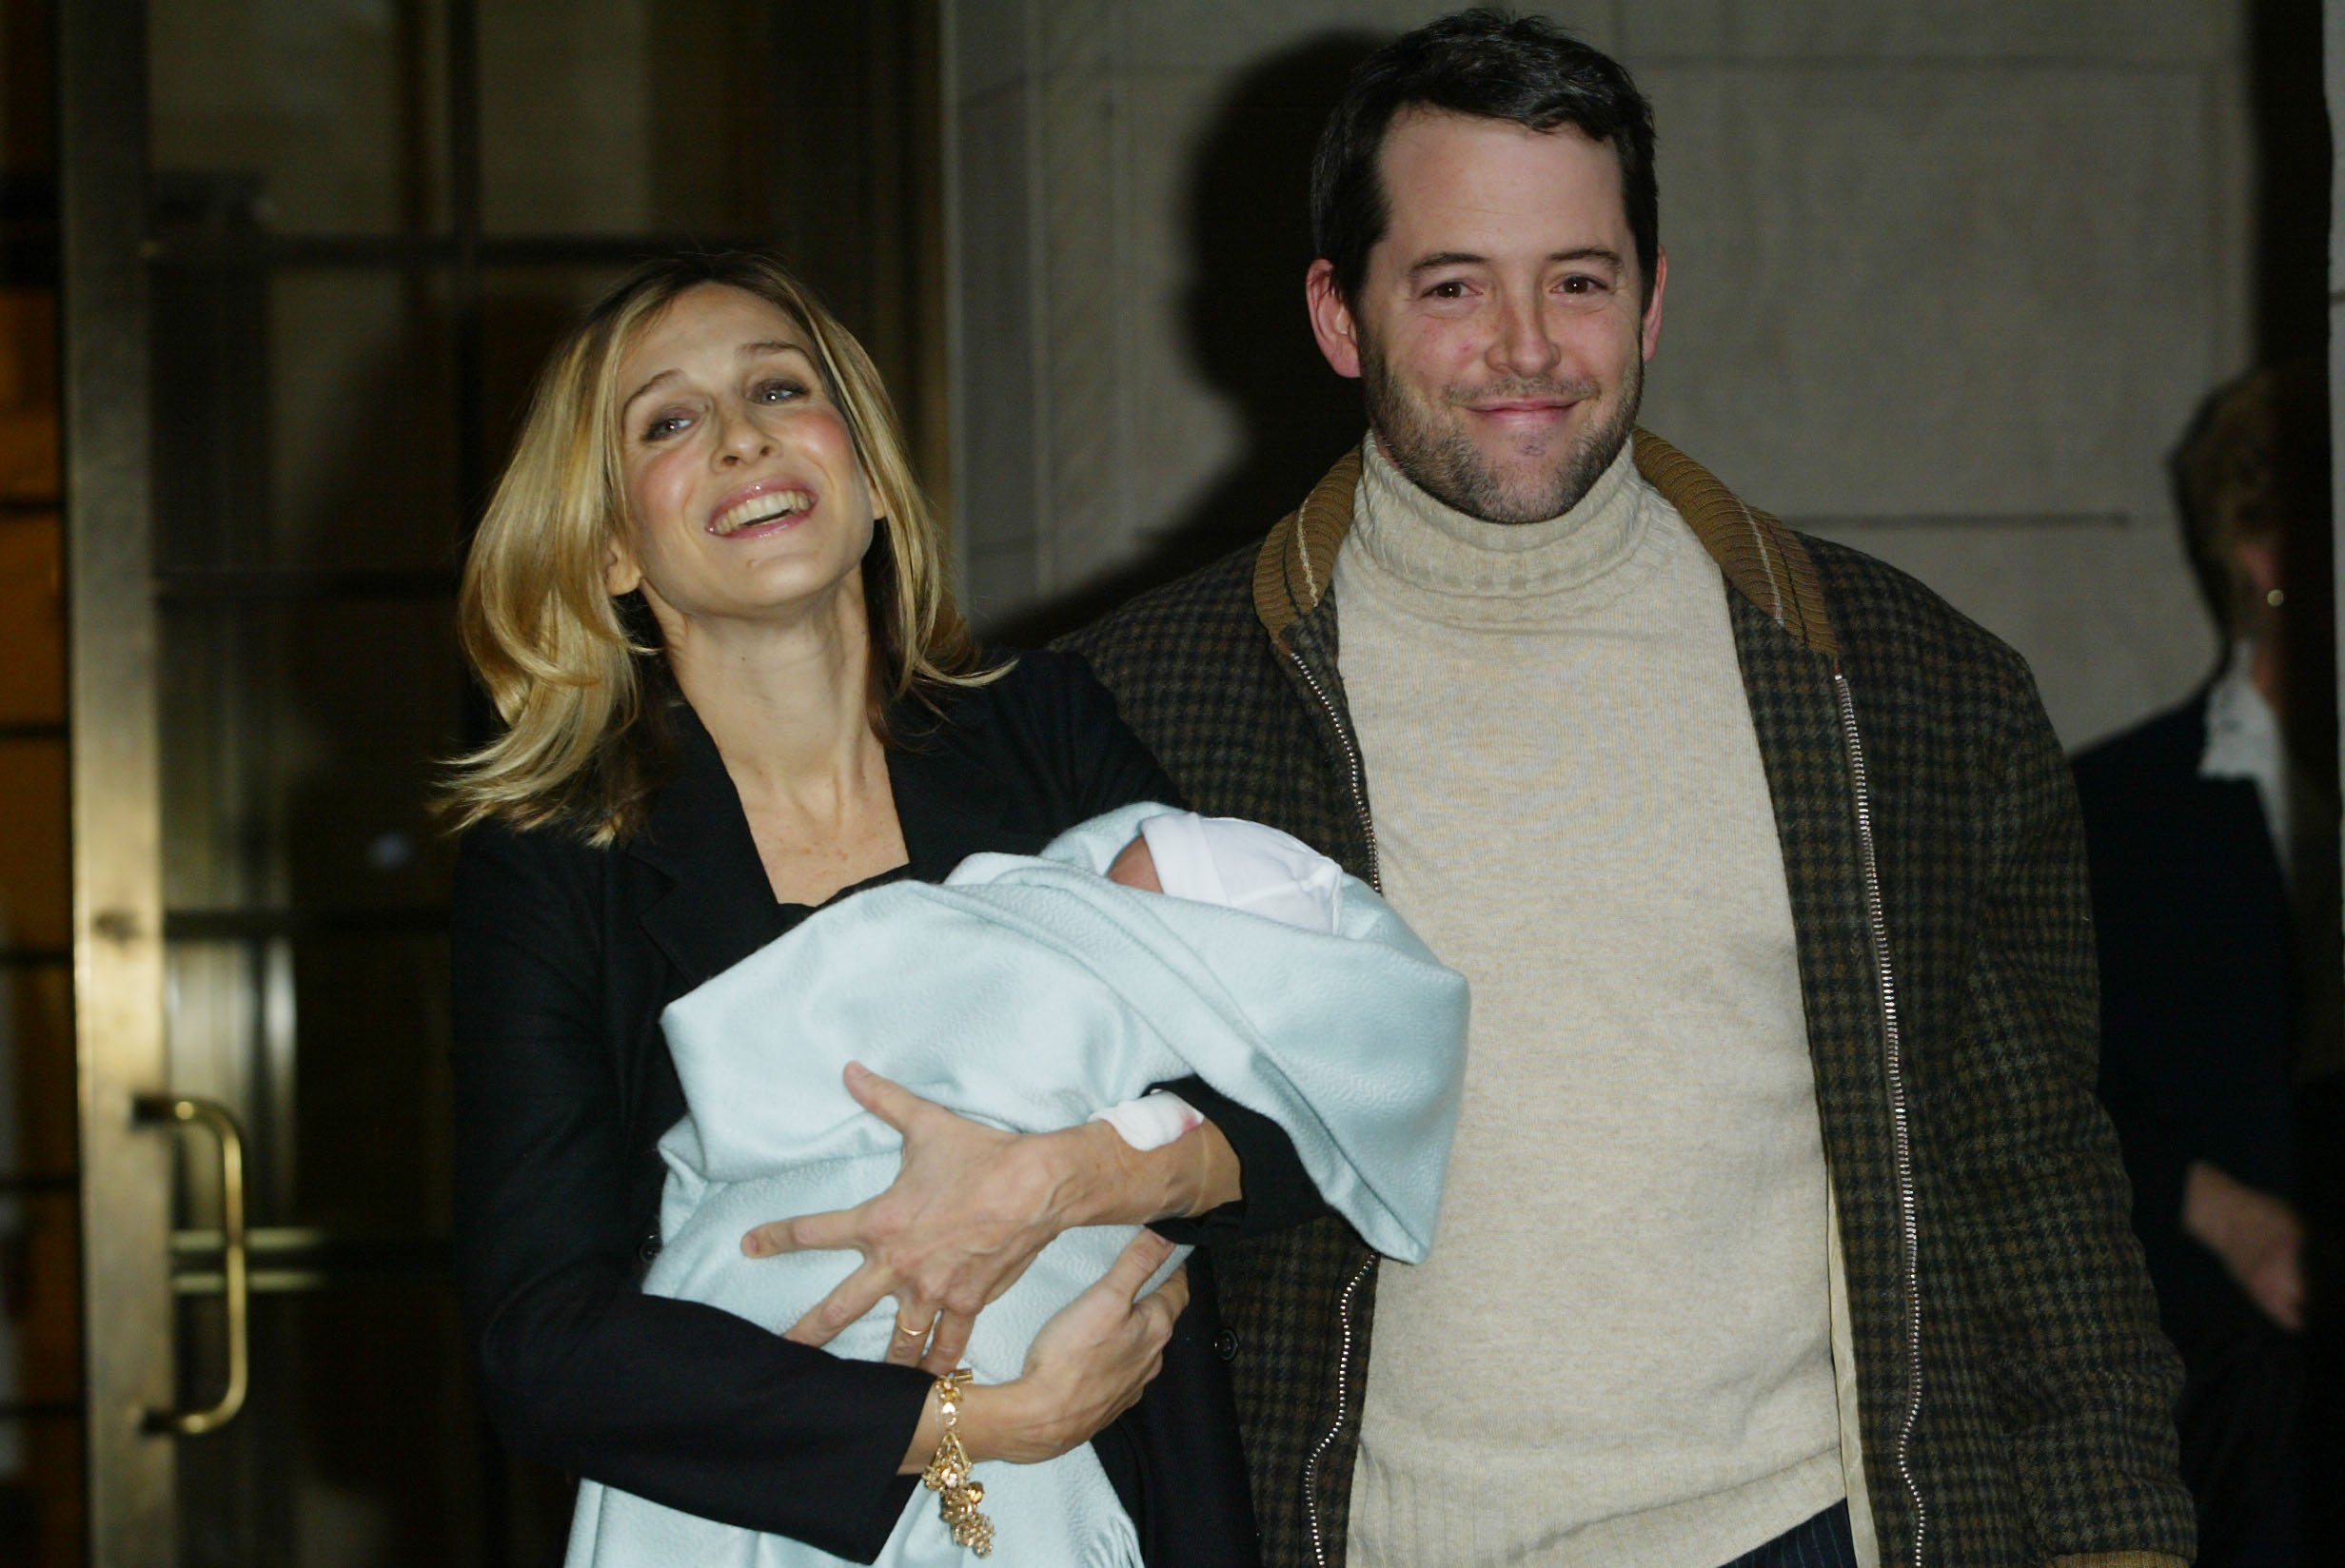 Actress Sarah Jessica Parker and husband actor Matthew Broderick leave Lennox Hill Hospital with their baby boy James Wilke Broderick in New York City. November 1, 2002. | Source: Getty Images